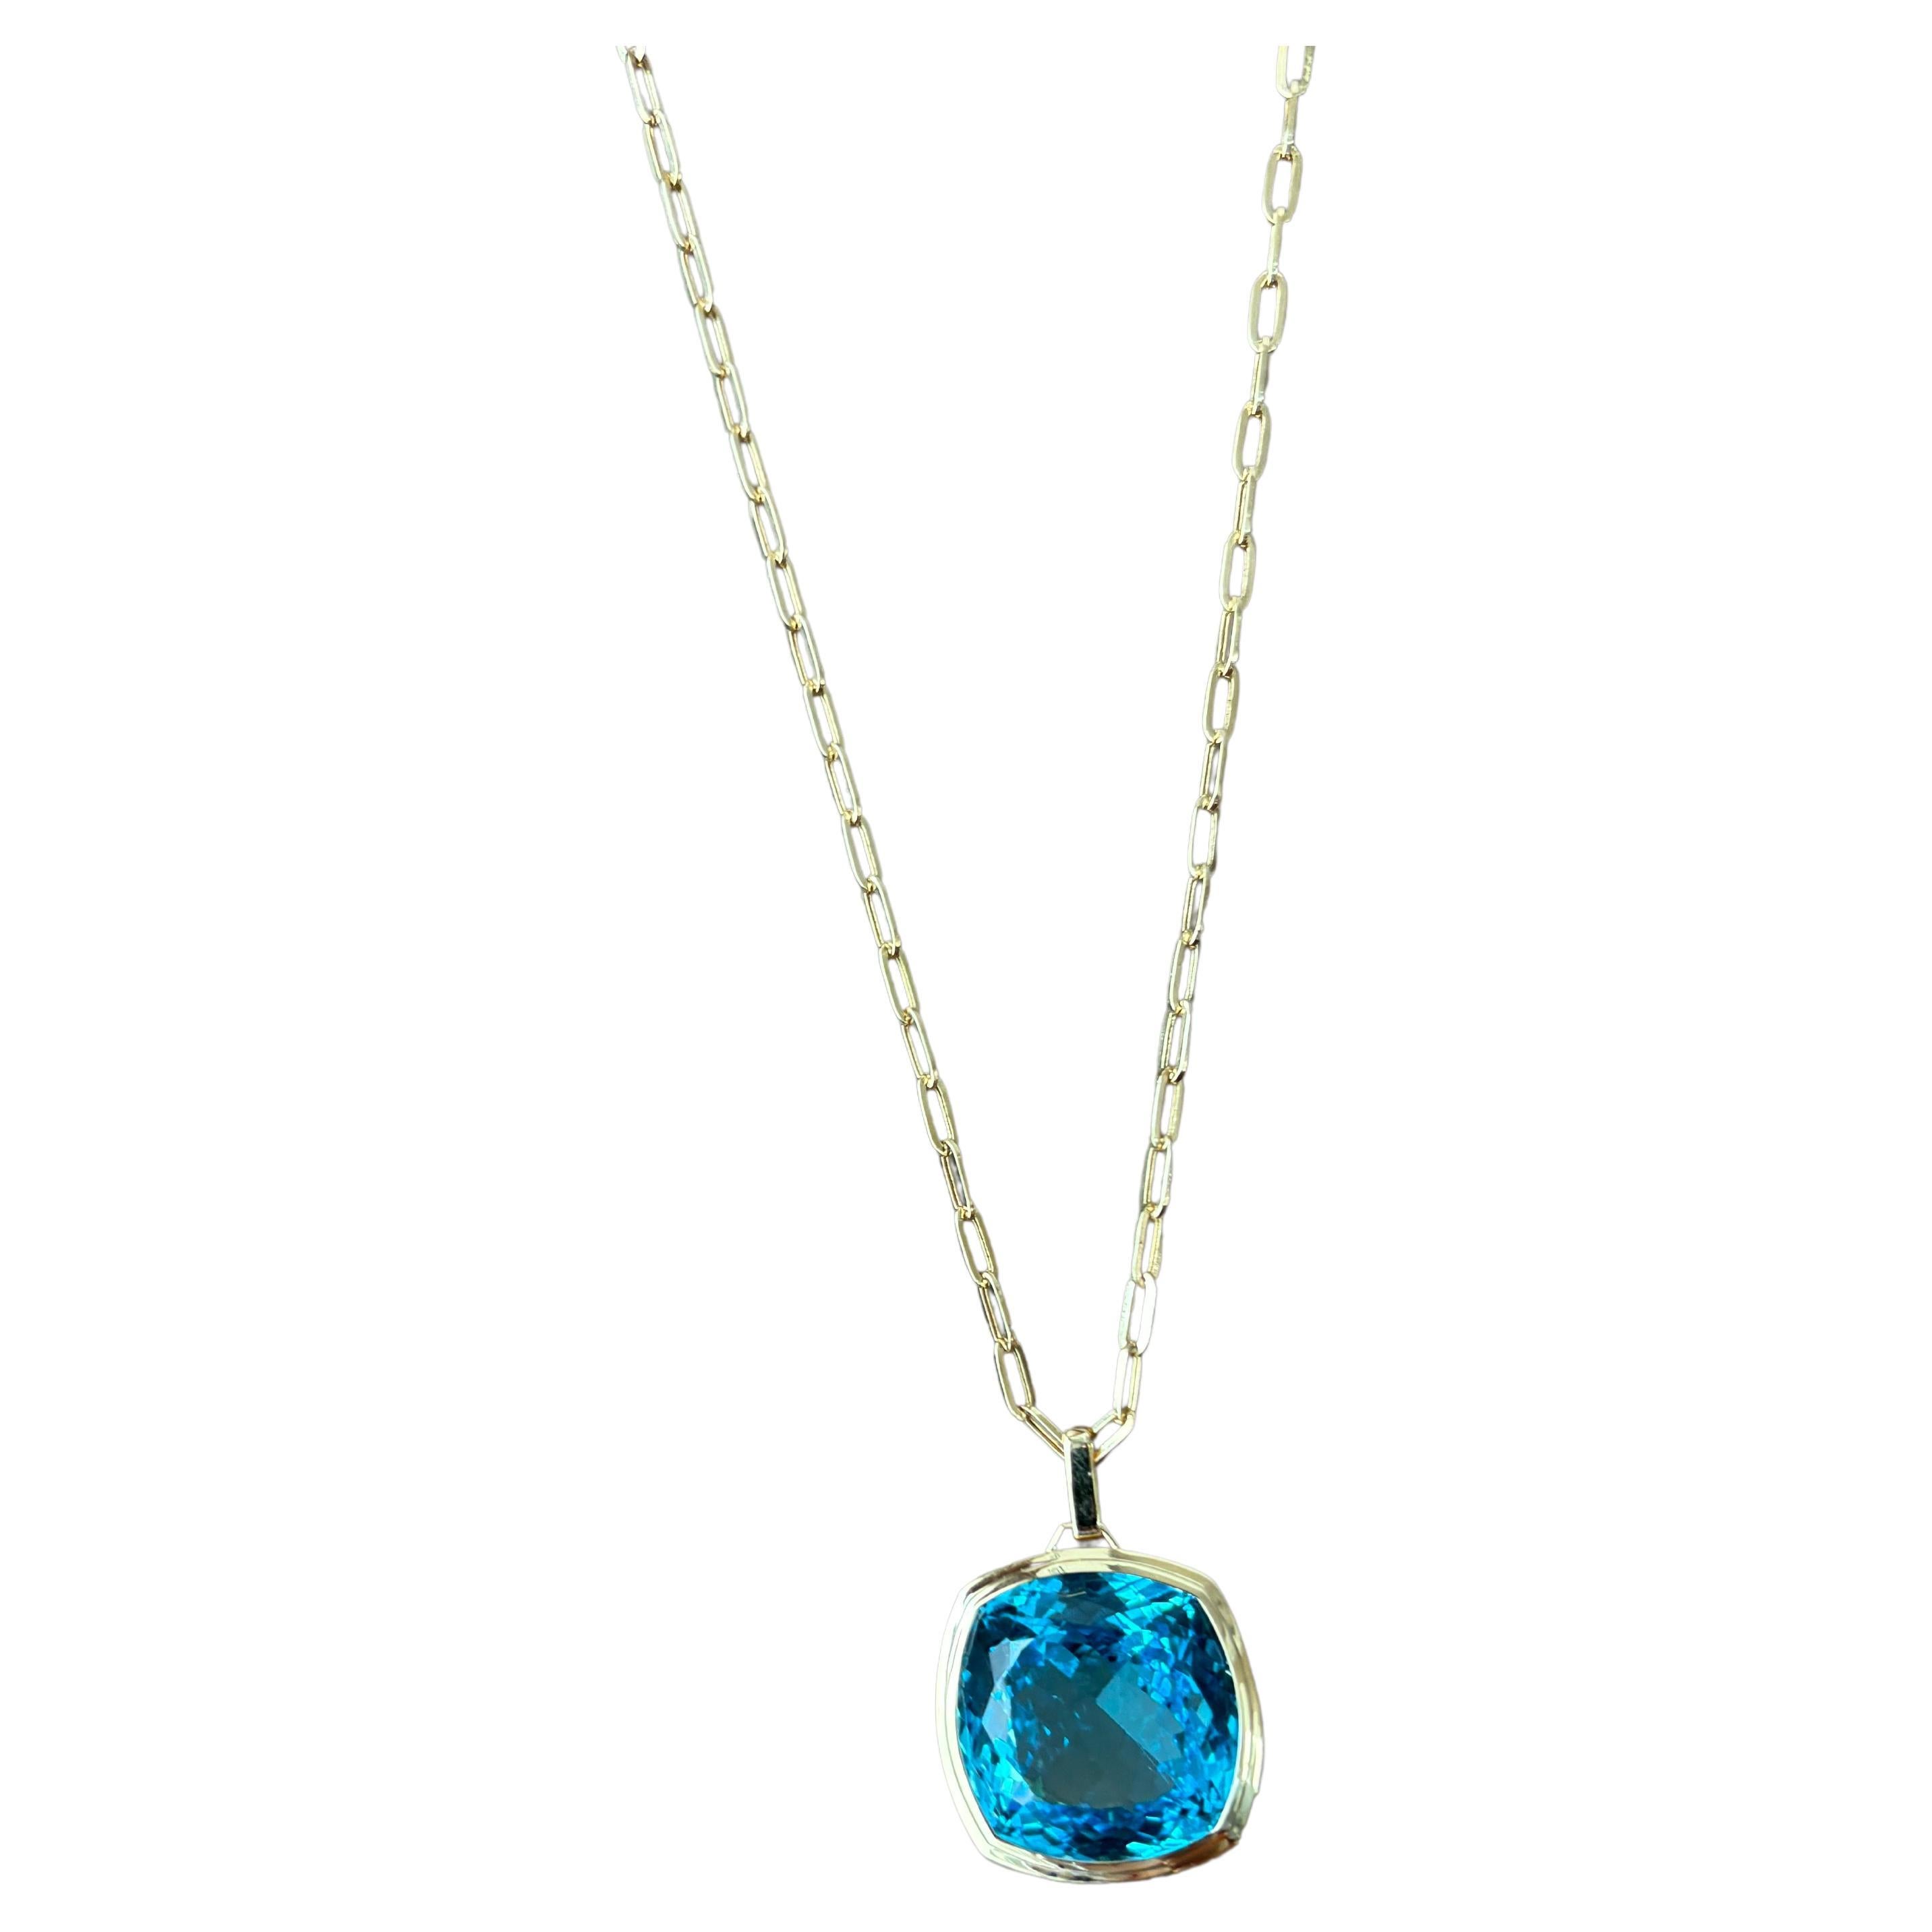 82.46 Carat Blue Topaz Pendant Necklace with Link Chain For Sale